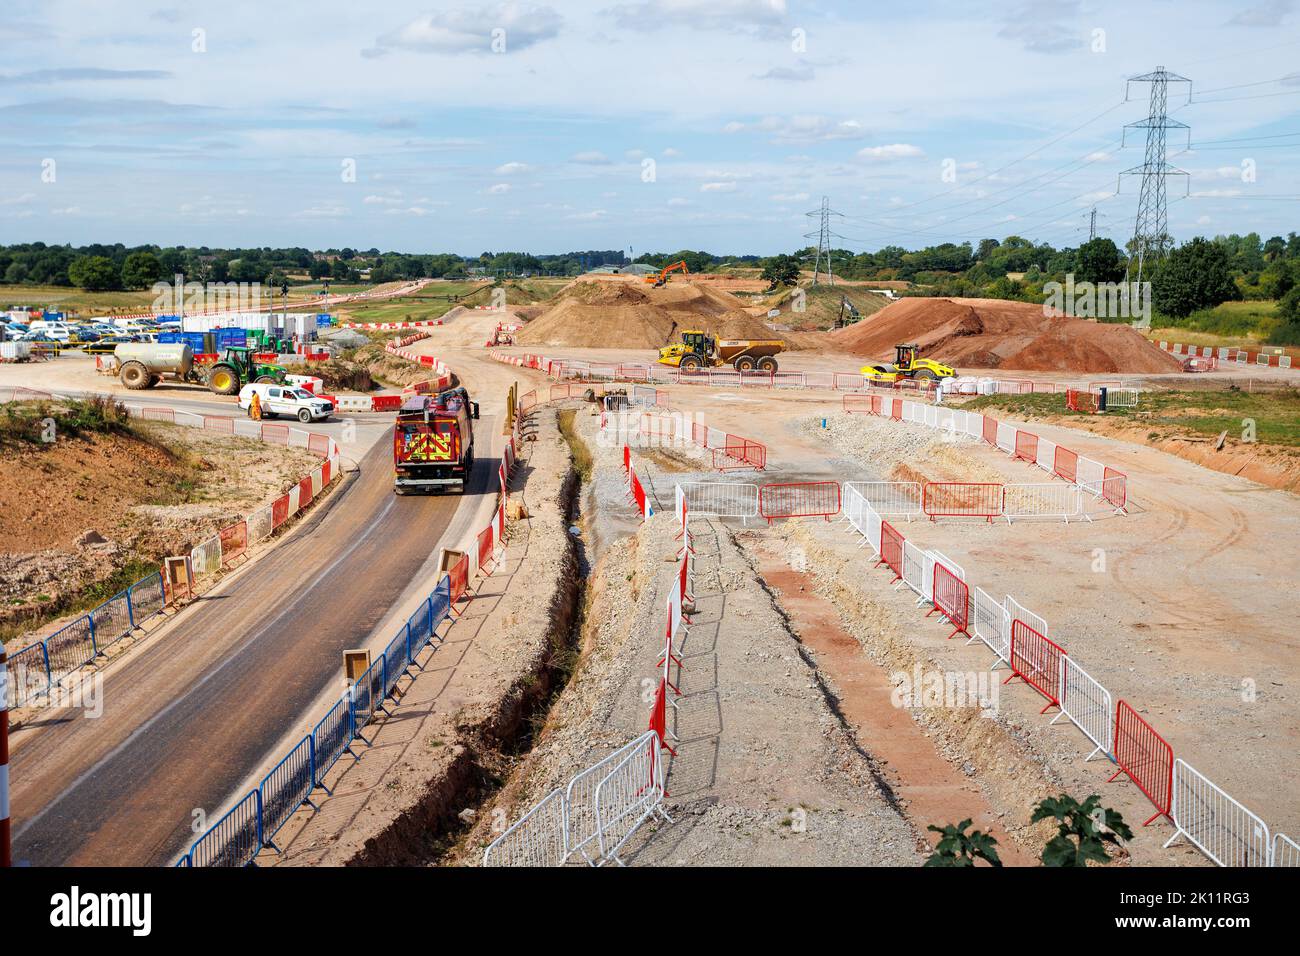 Construction of the HS2 Rail network taking place at Waste Lane near Berkswell, Warwickshire. The view is of construction work looking towards Berkswell, picture taken from Waste Lane bridge. Stock Photo